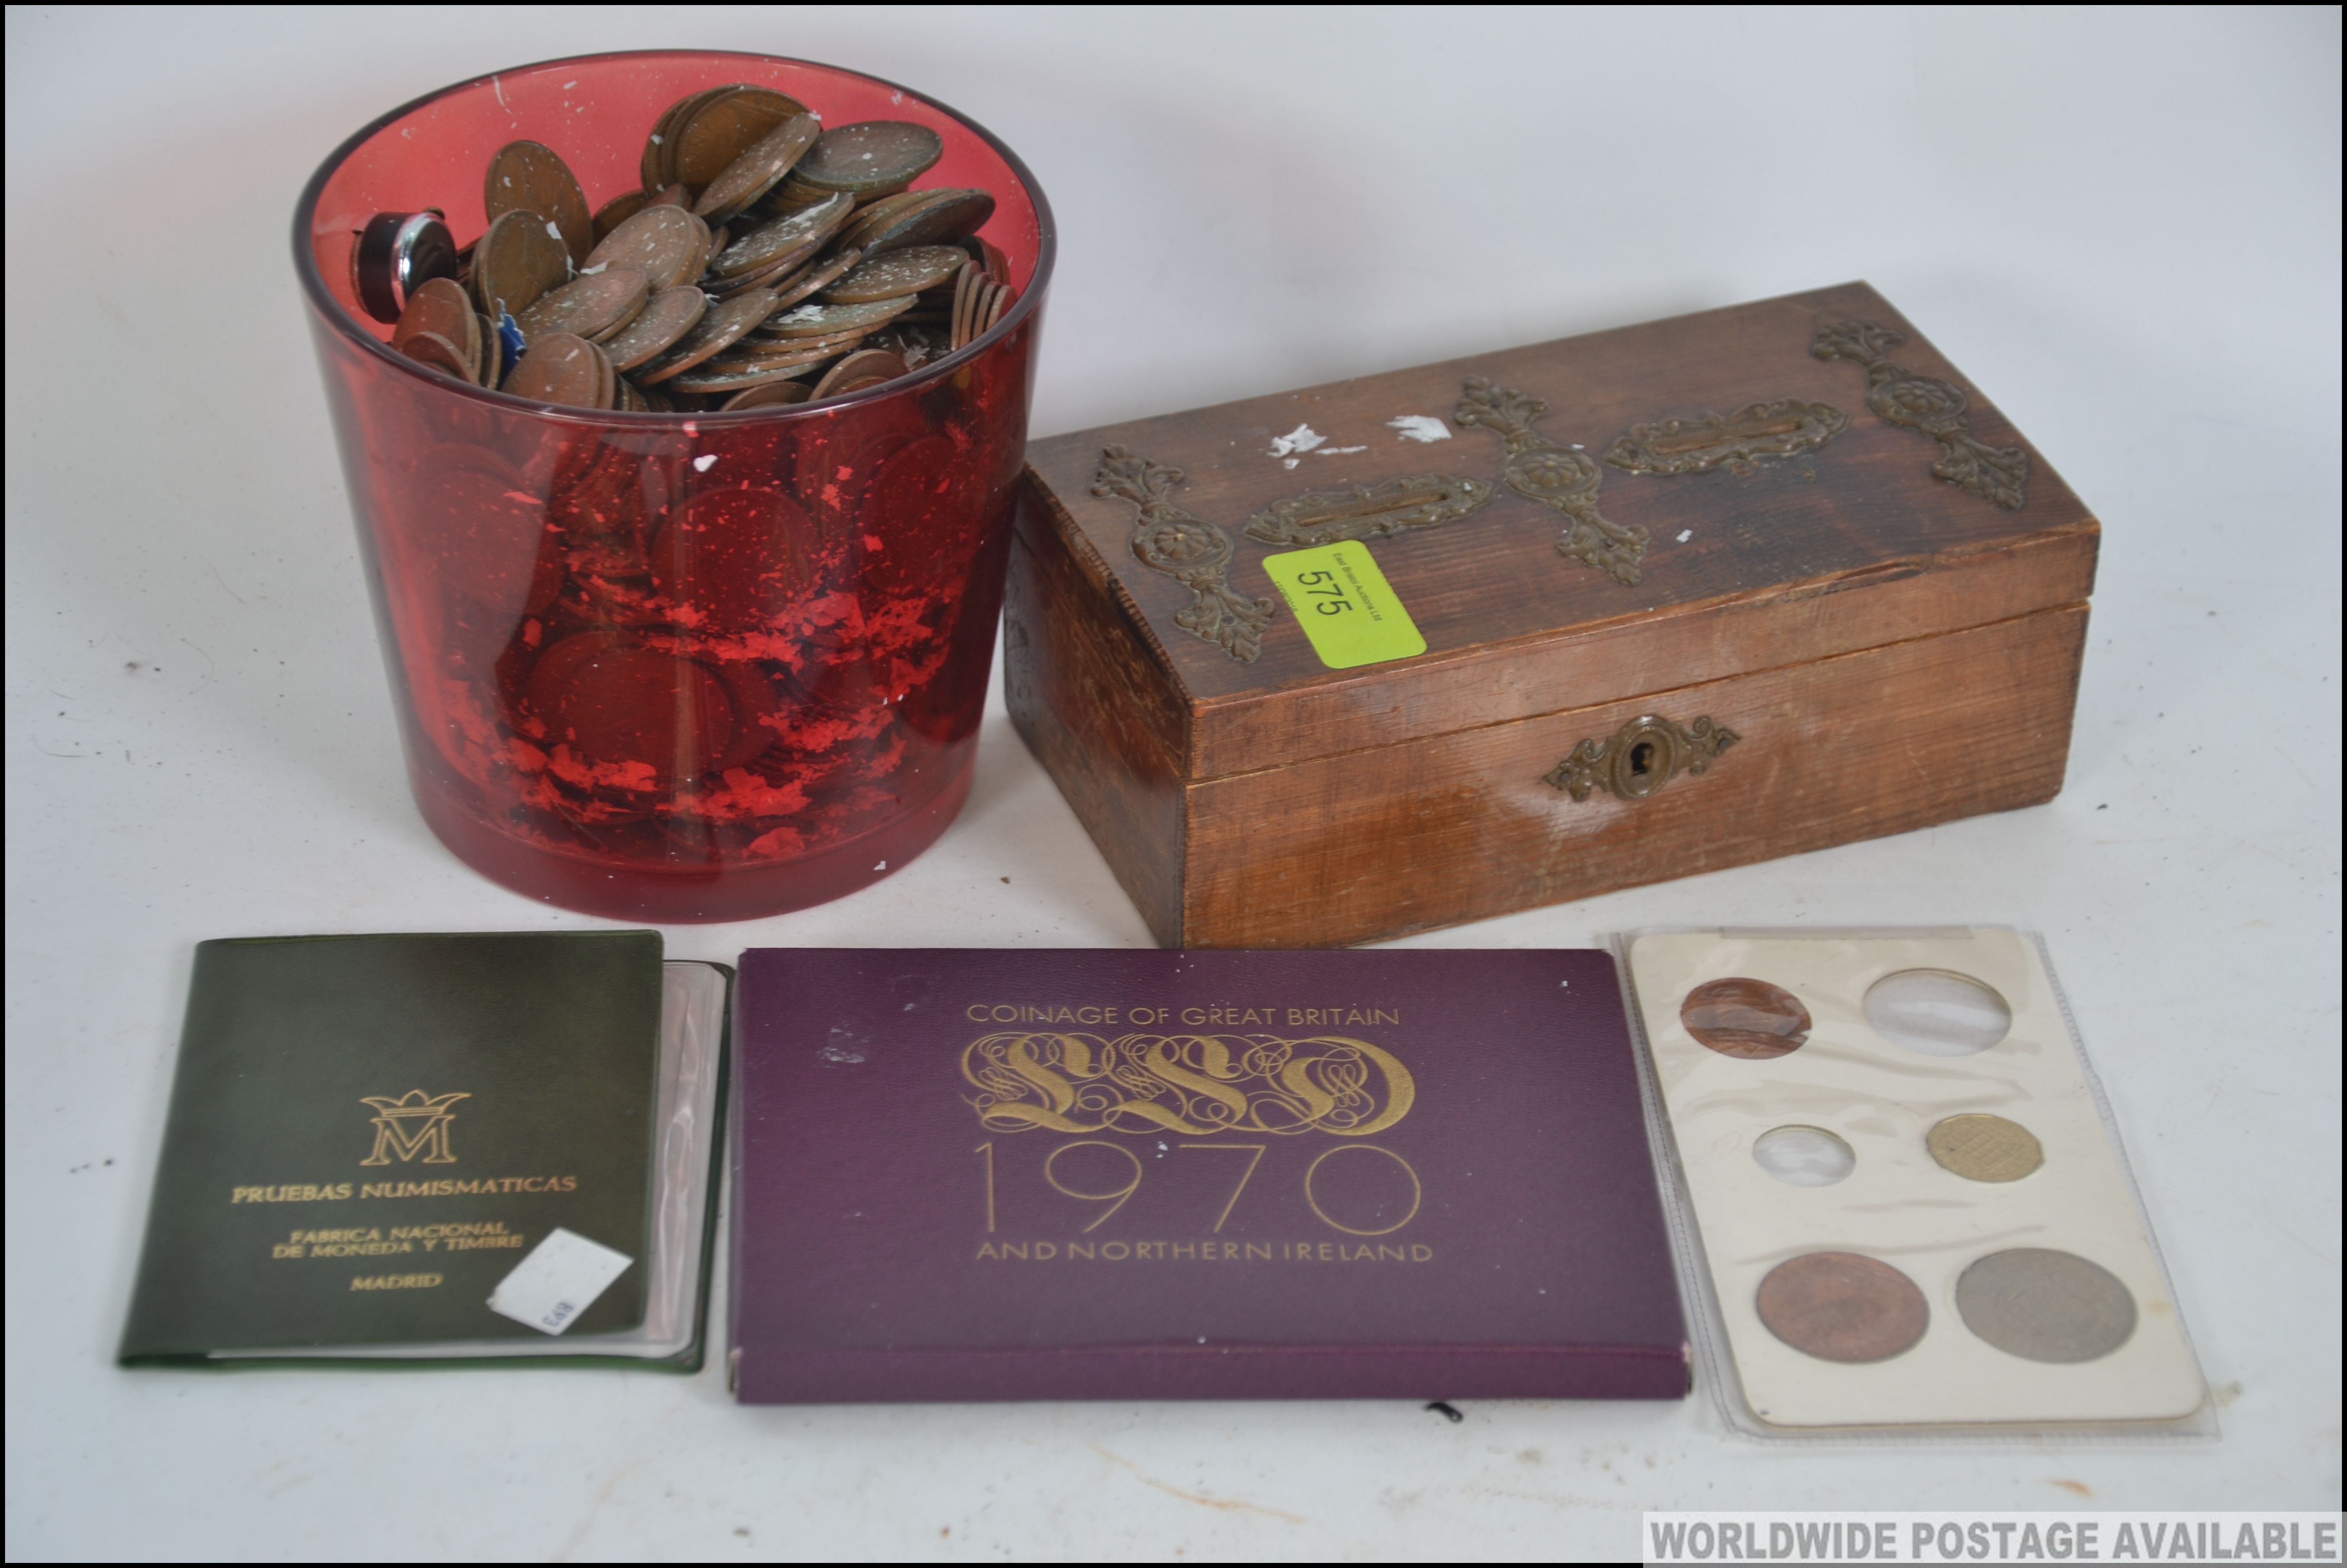 A collection of vintage British coins dating from the 19th century along with a vintage wooden